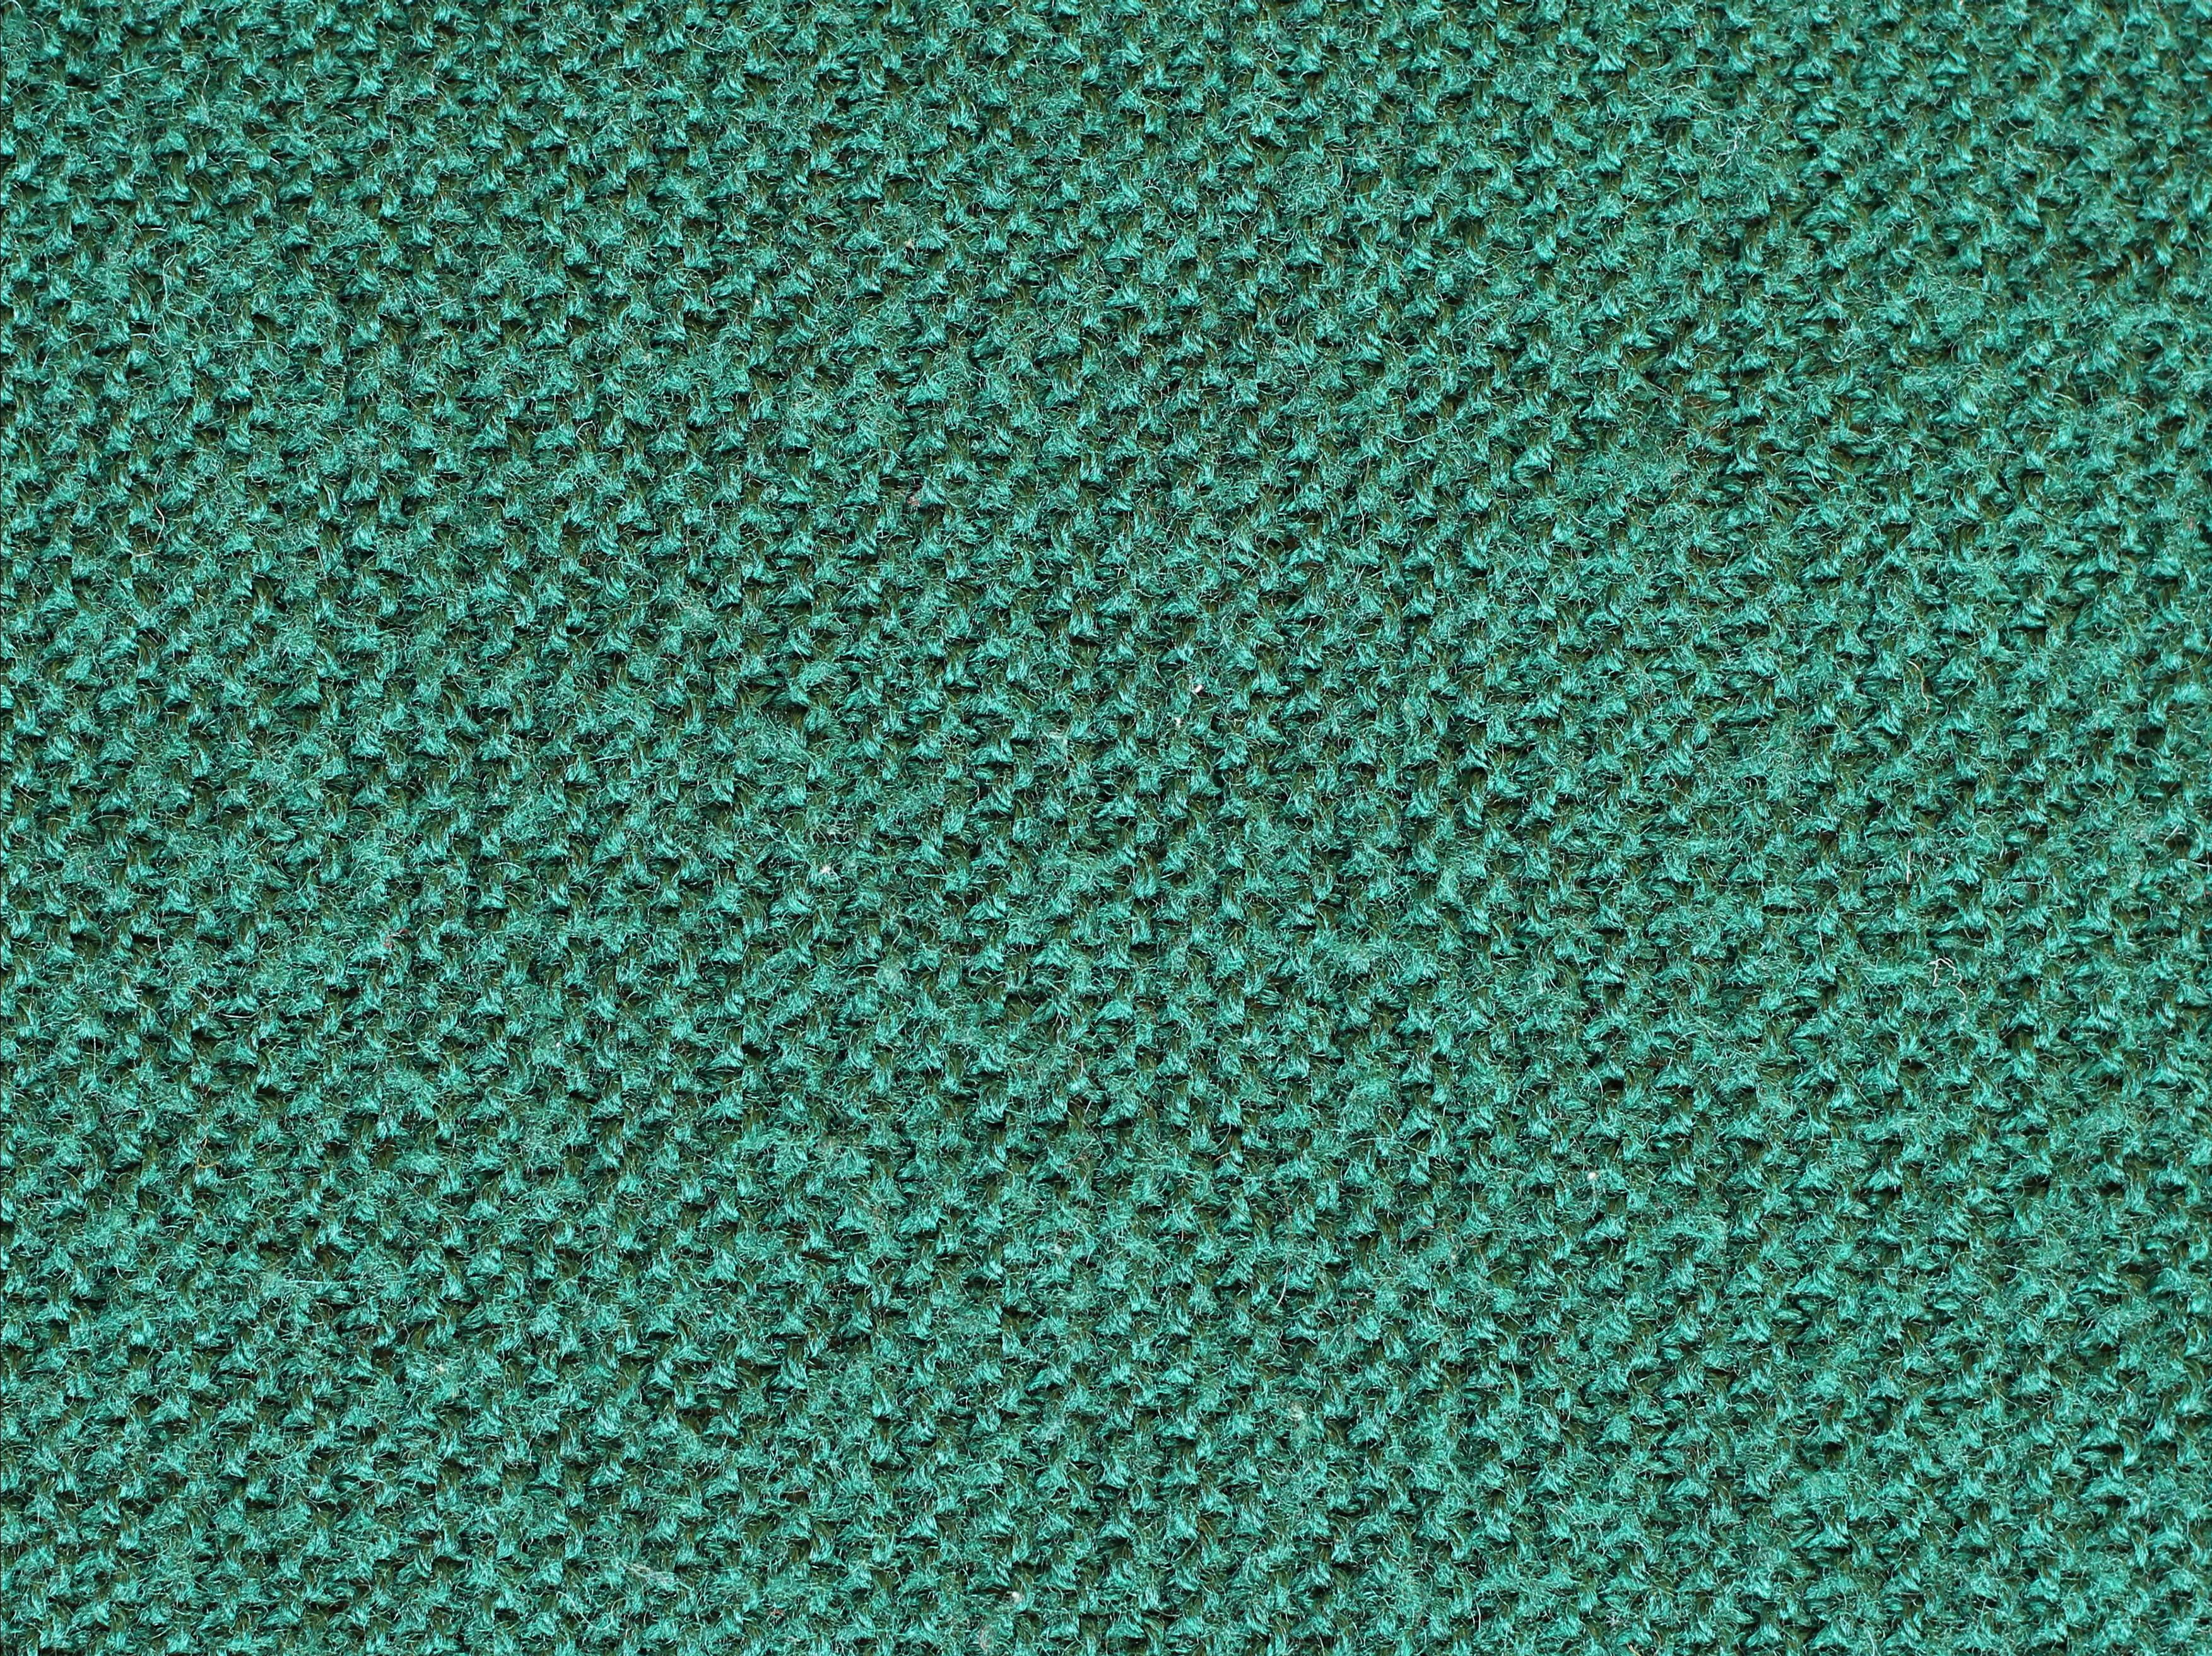 Green knitted wool texture background image